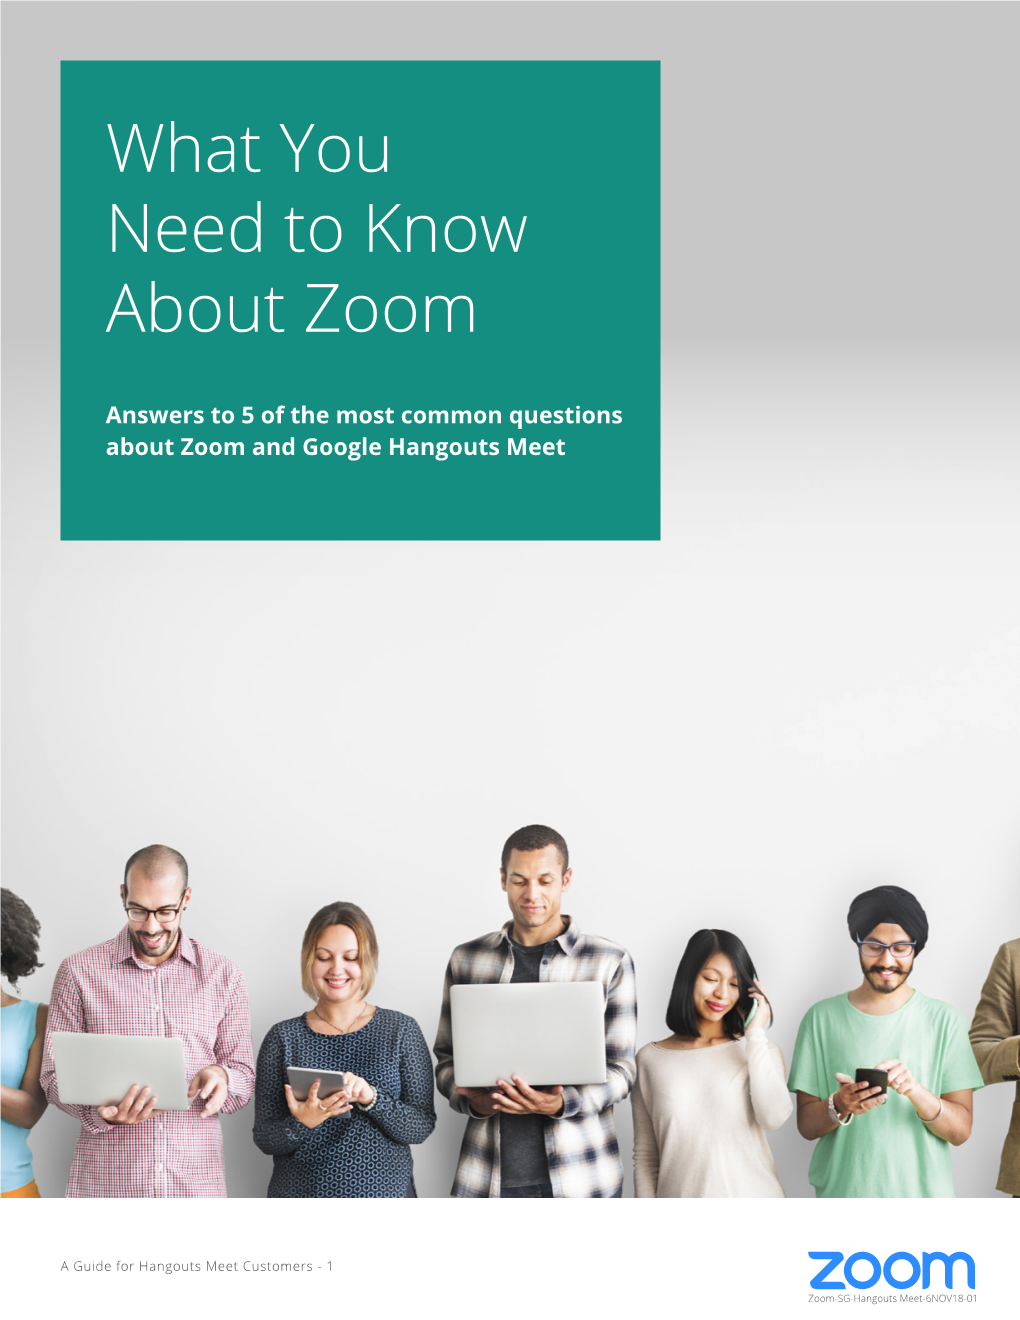 Answers to 5 of the Most Common Questions About Zoom and Google Hangouts Meet